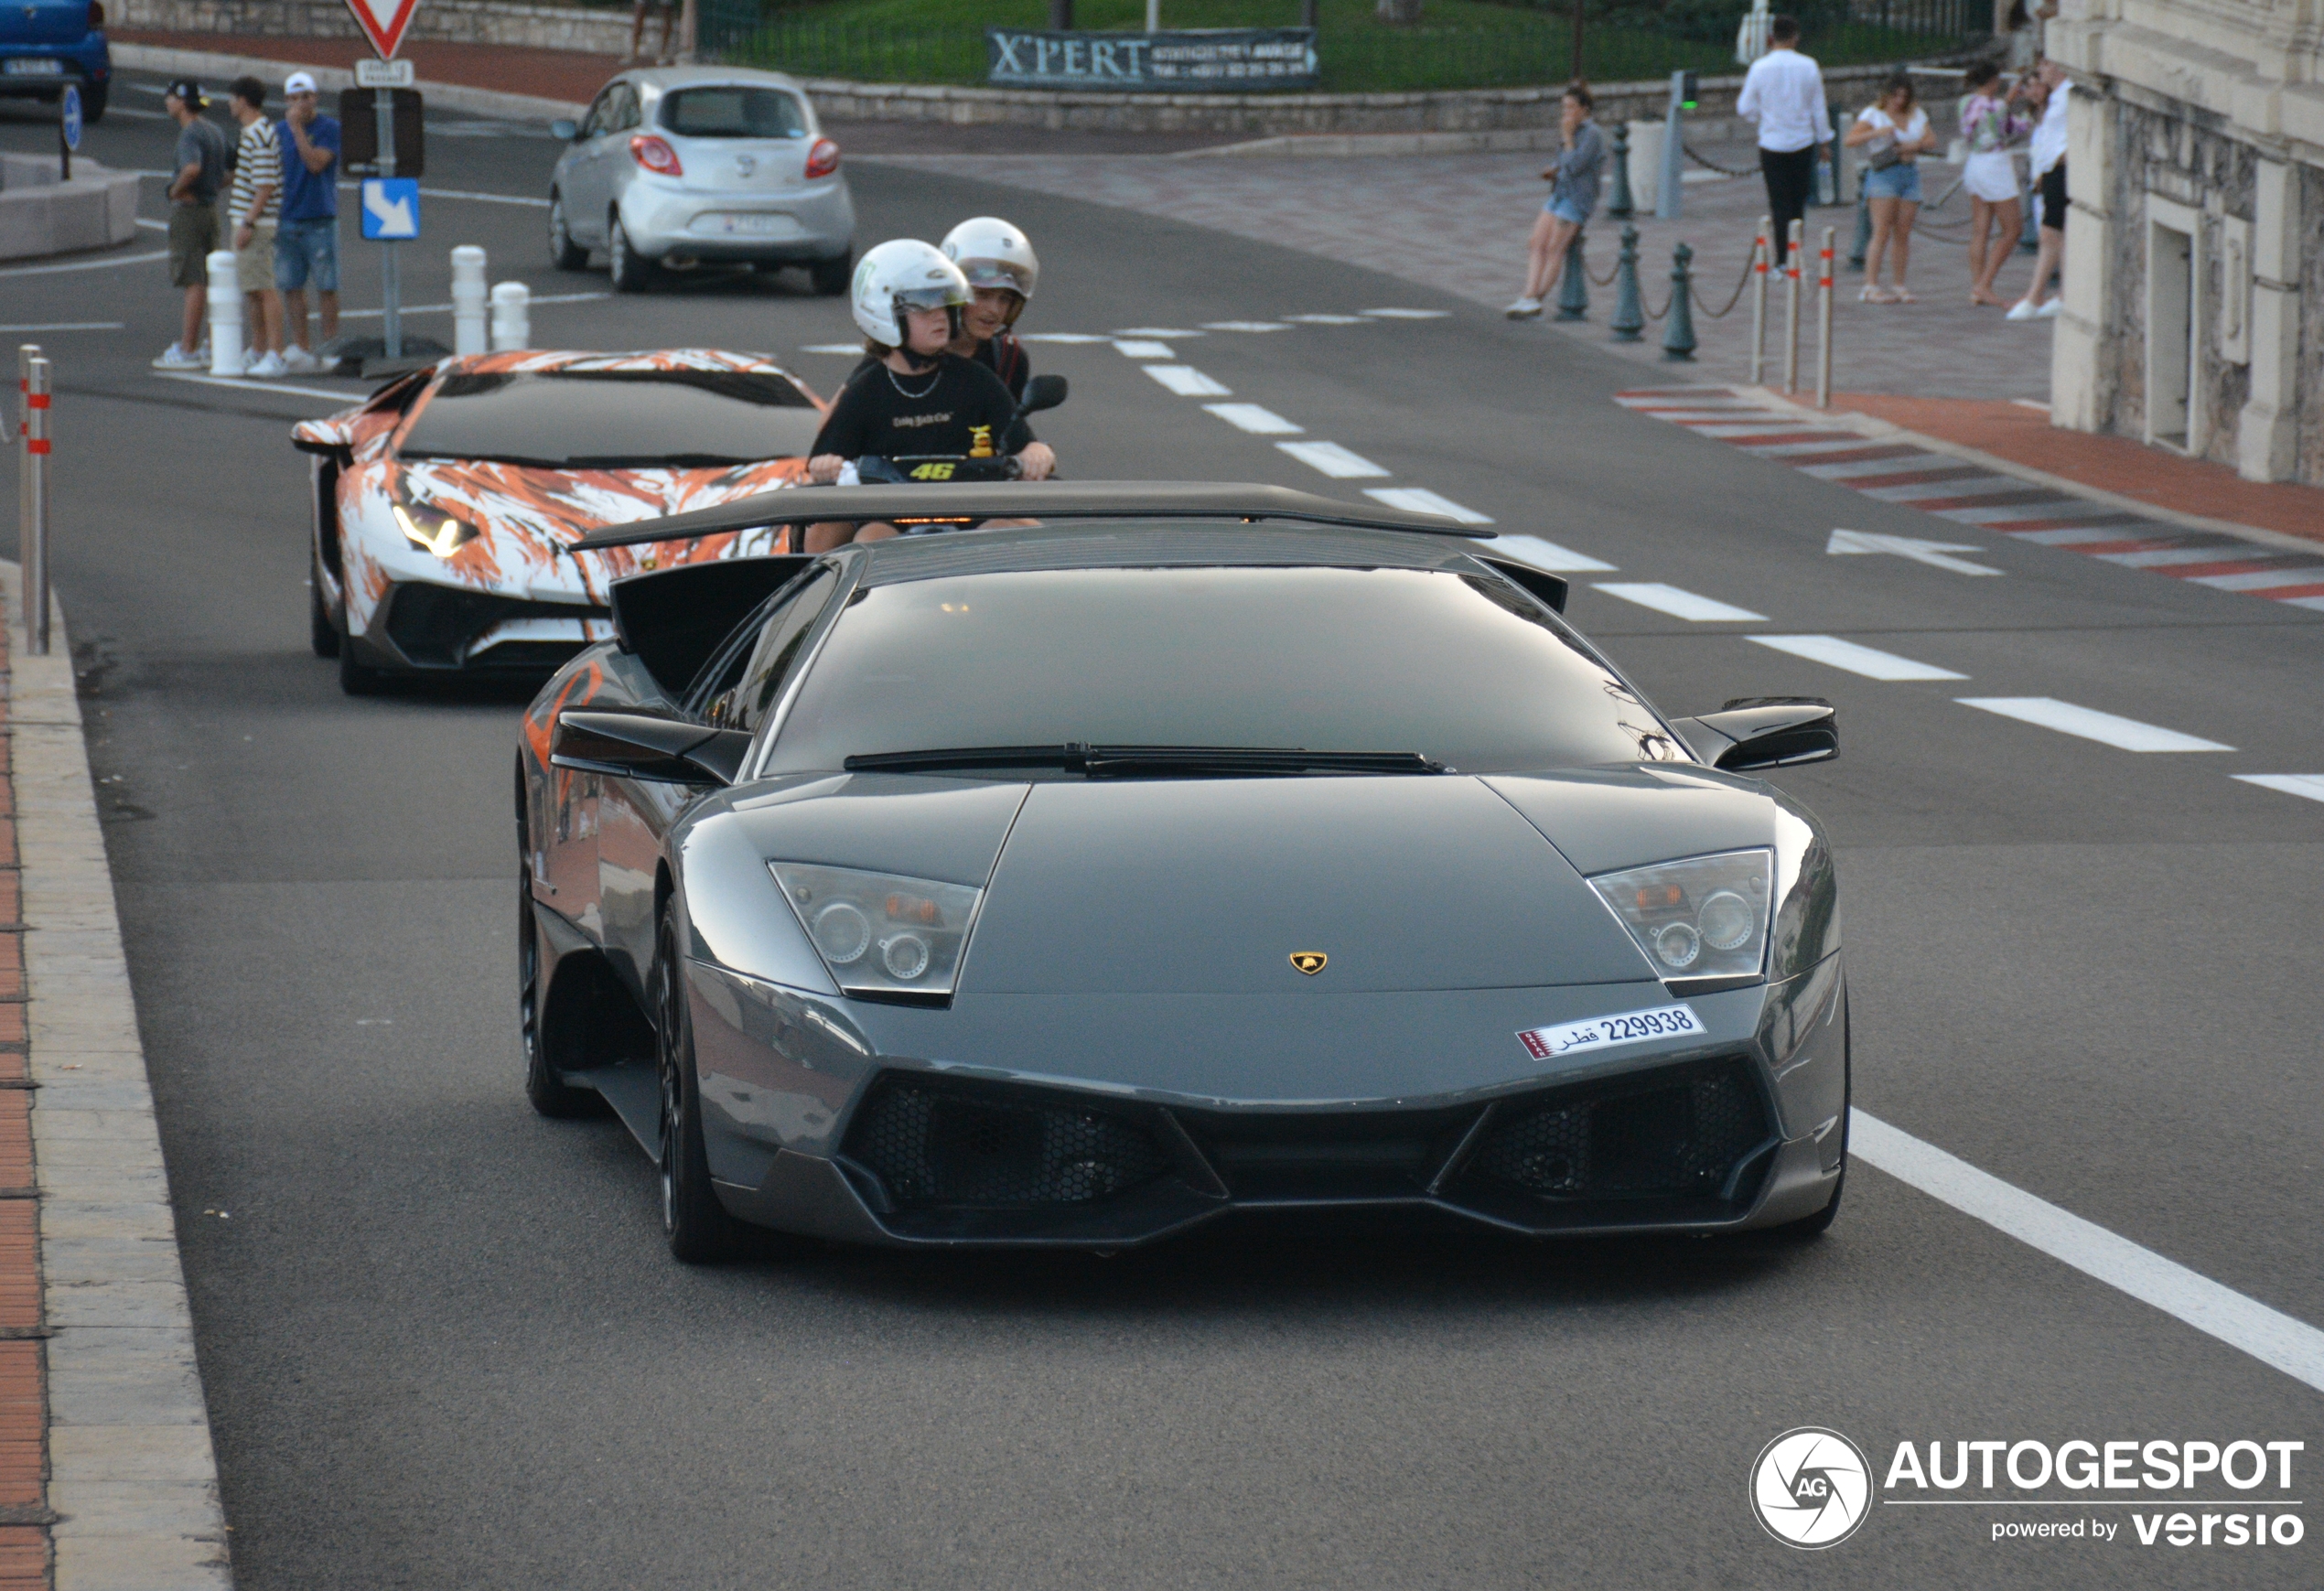 The next SV duo shows up in Monaco